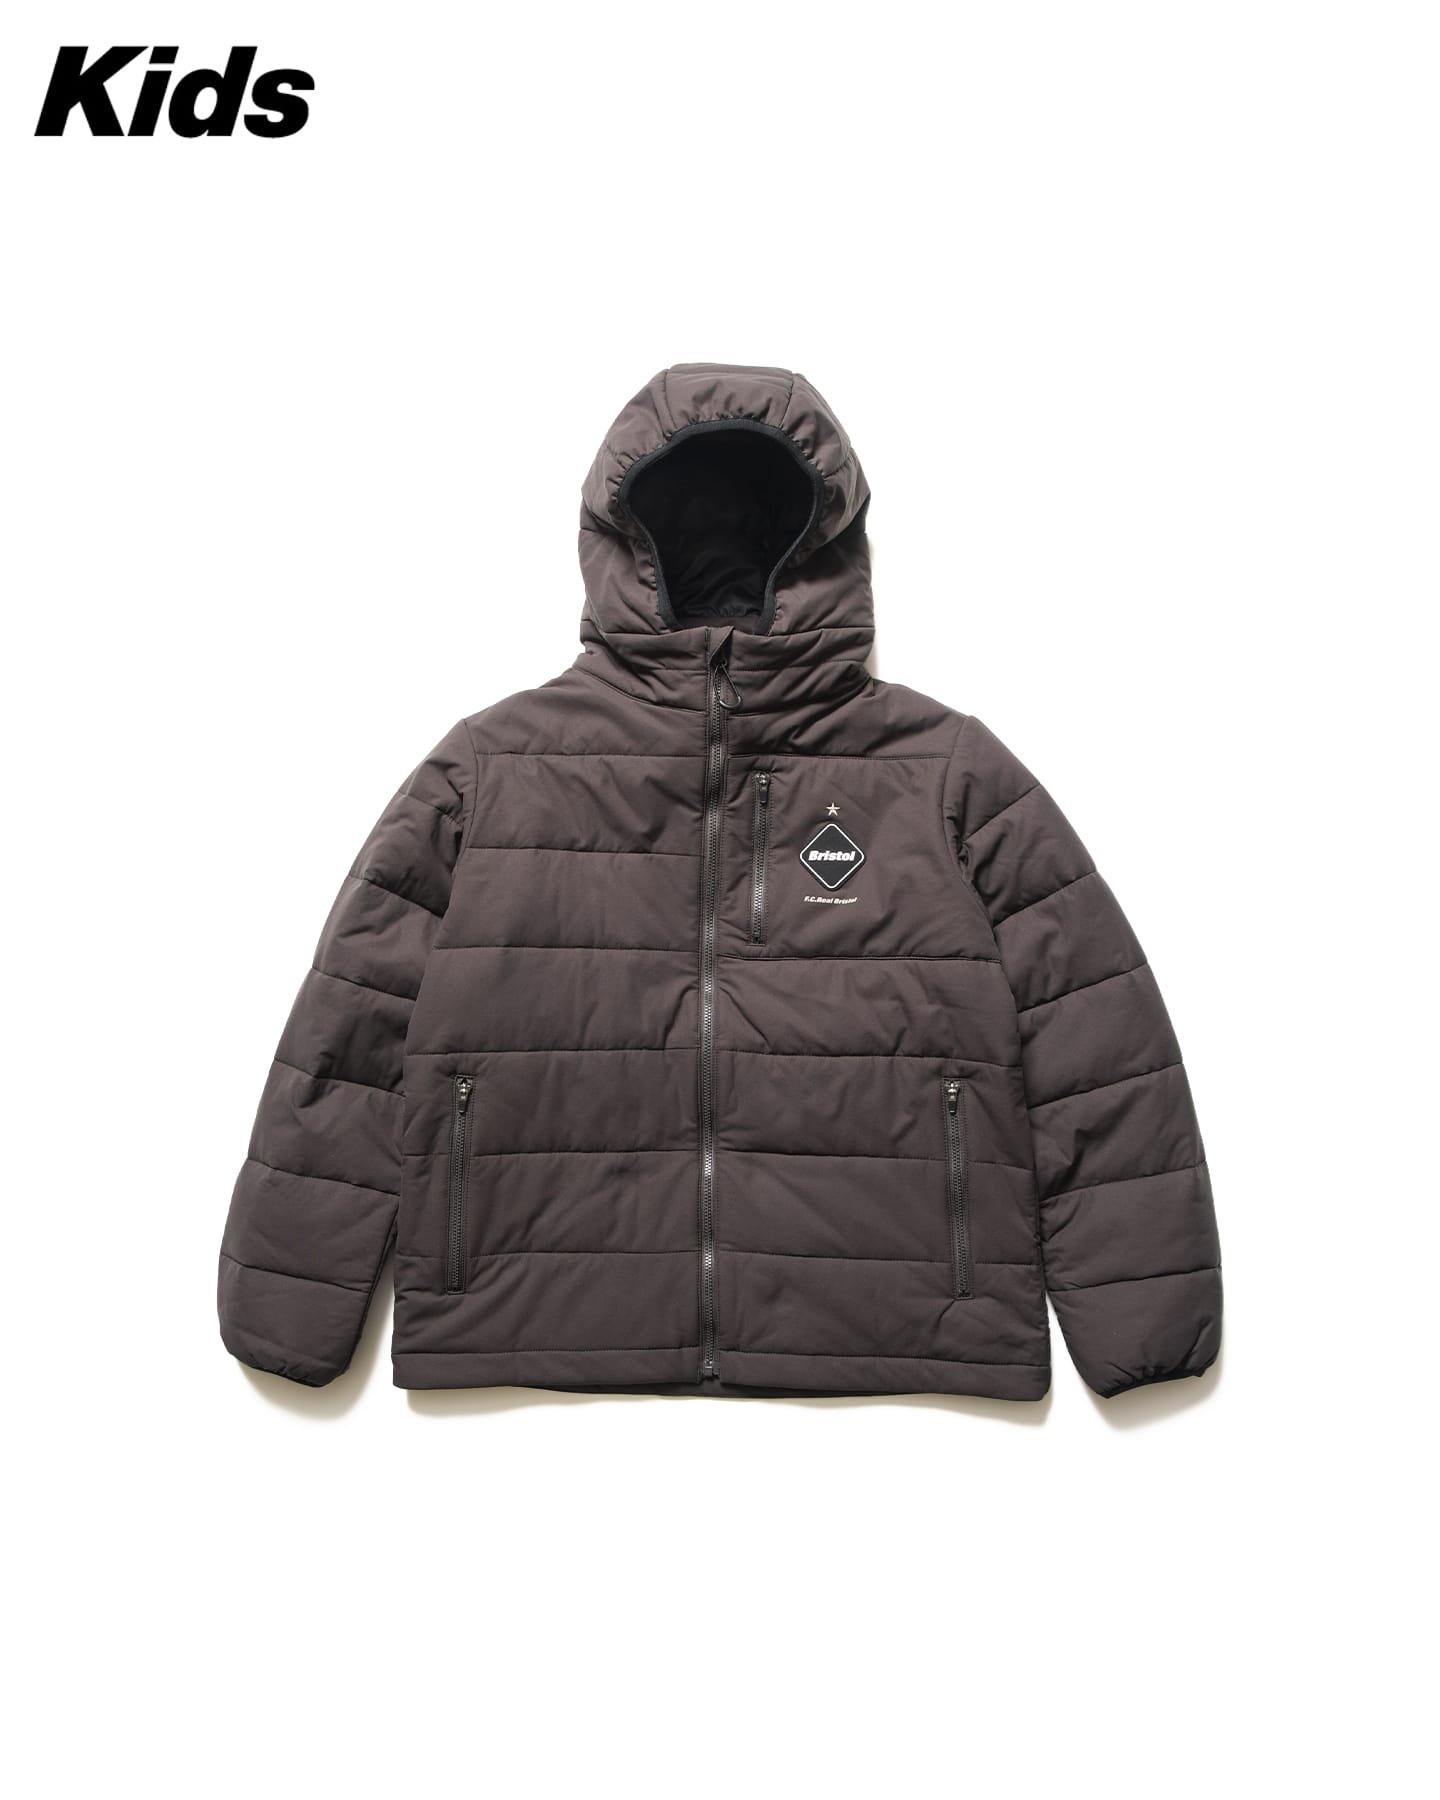 SOPH. | INSULATION PADDED HOODED JACKET(FREE (140-150) BROWN):